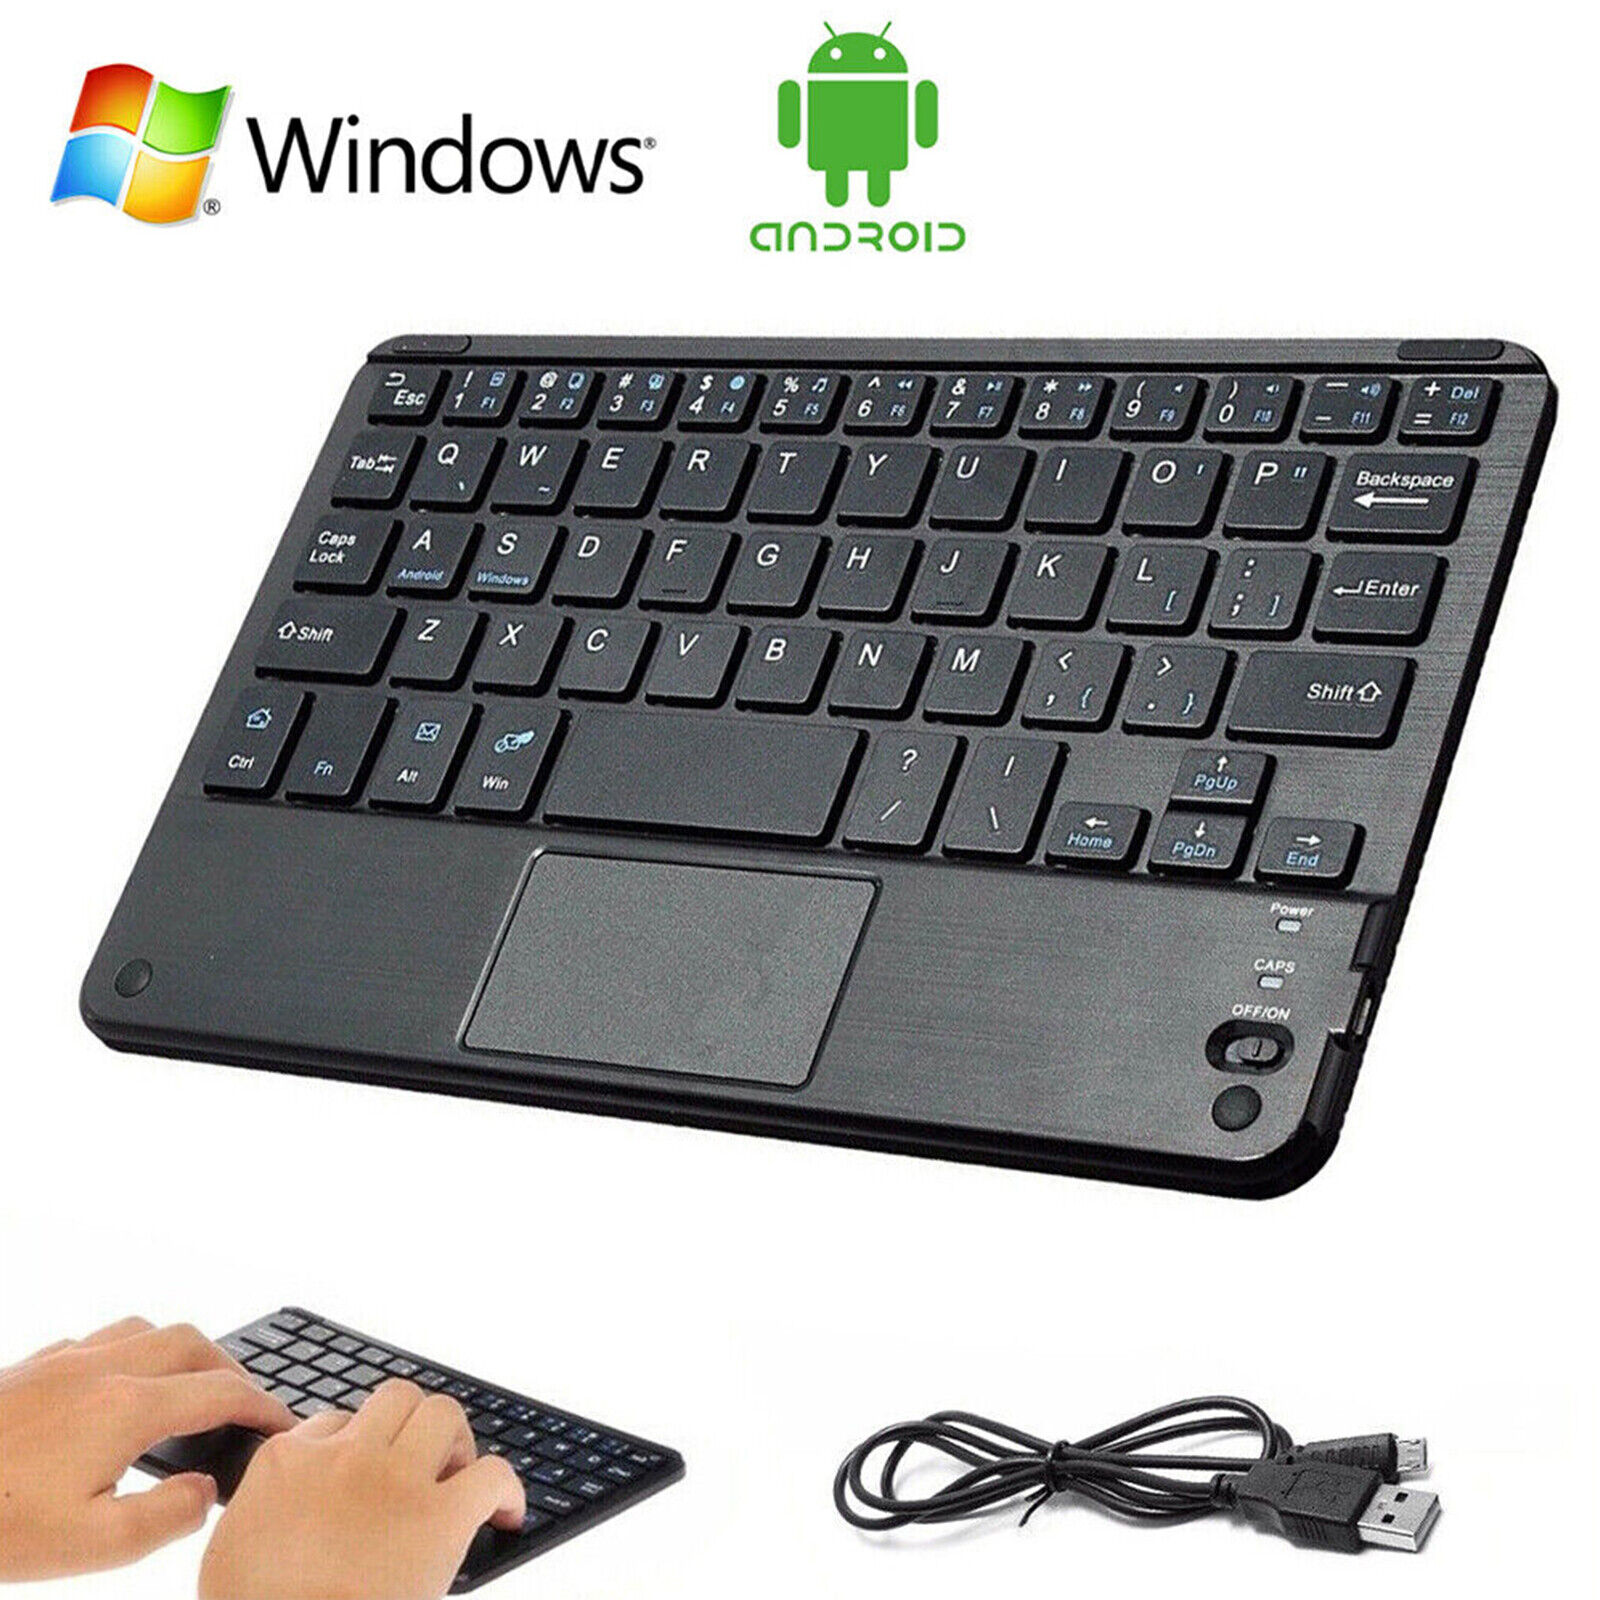 1xMini Bluetooth Wireless Keyboard w/Touchpad Mouse fits for Android/IOS Tablets